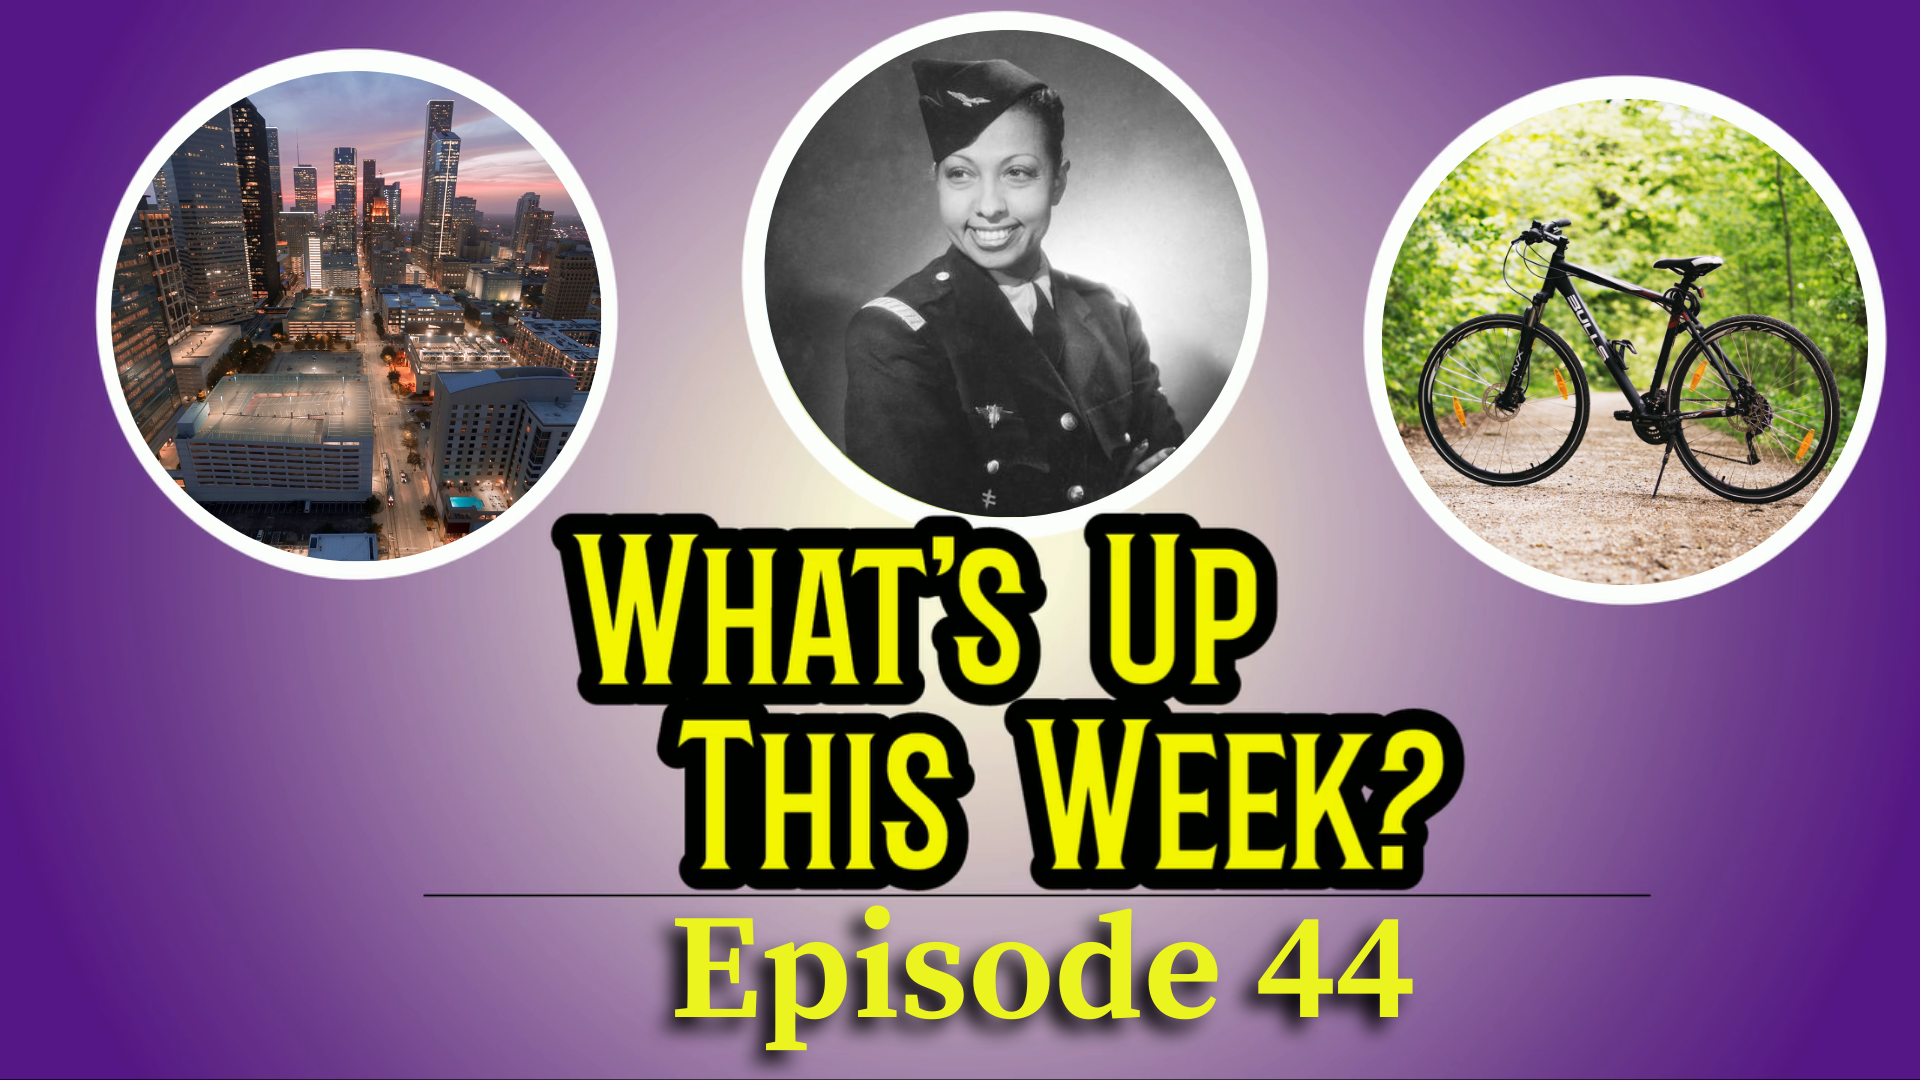 Text: What's Up This Week? Episode 44. 3 images in circles: Houston skyline, Josephine Baker, and a bicycle